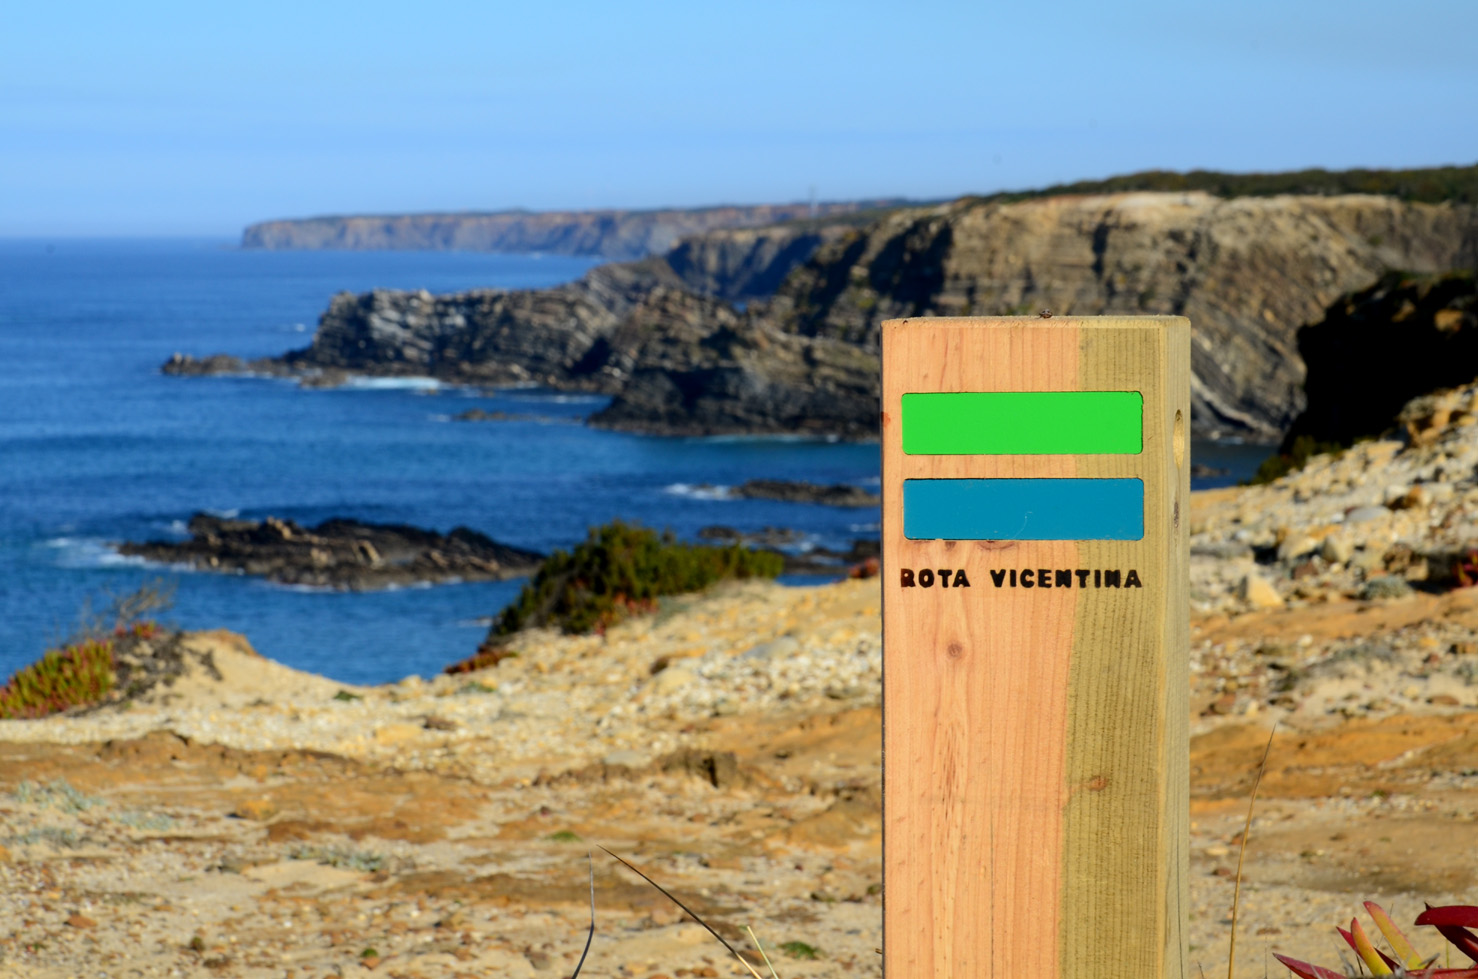 Walking the fisherman’s trail on the Costa Vicentina with guide.